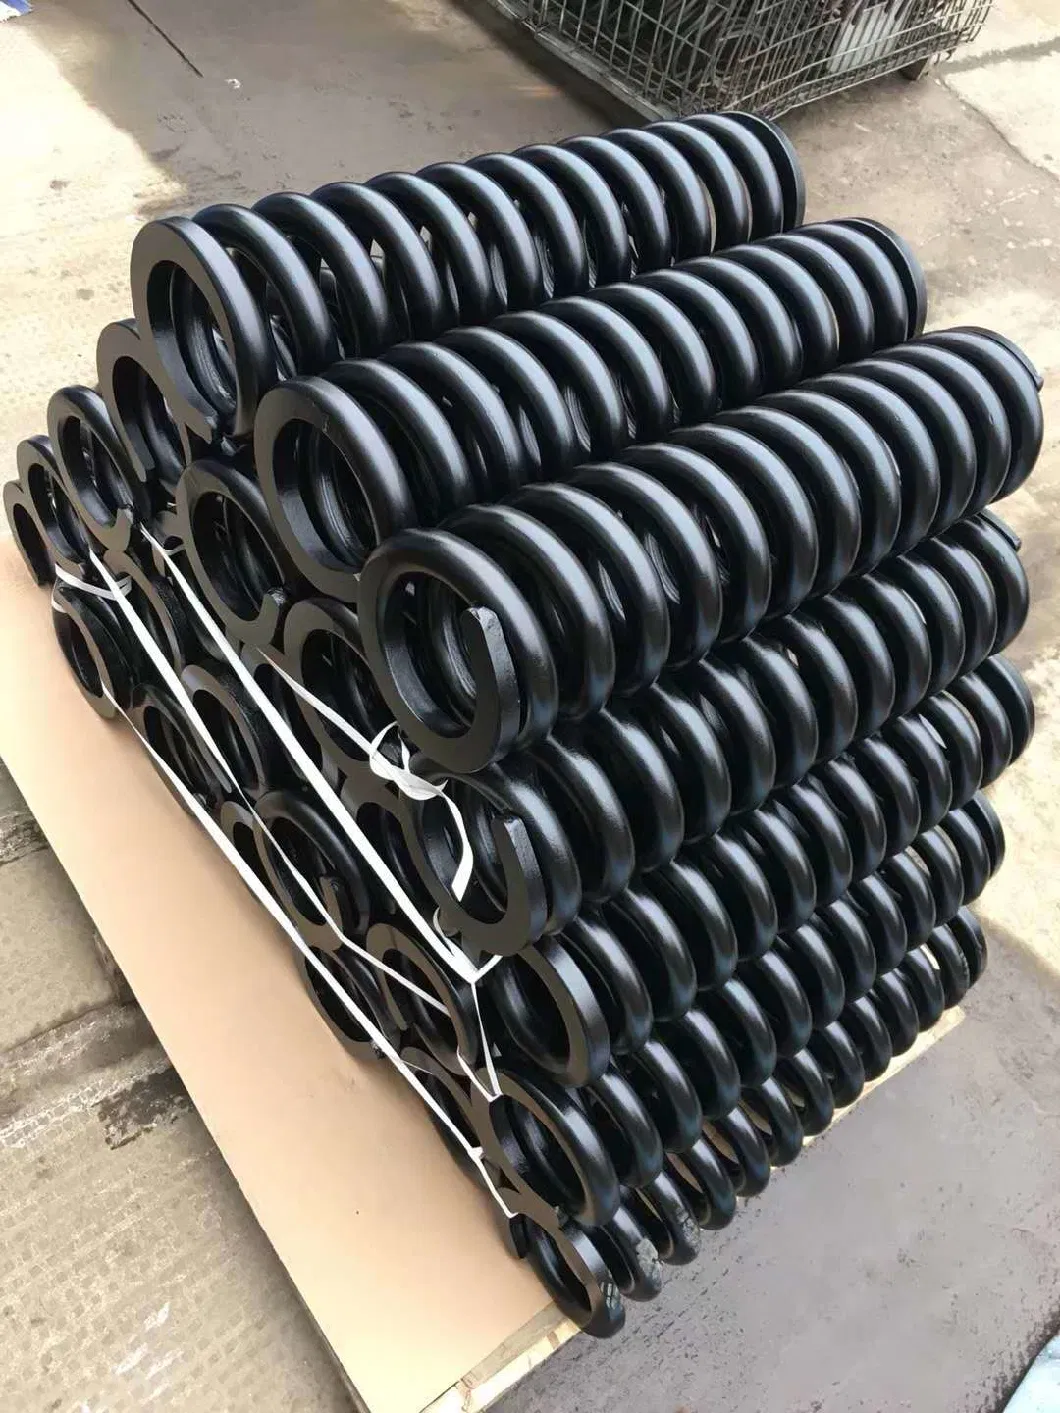 Production of Large Diameter Springs Automotive Mechanical Springs High-Temperature Resistant